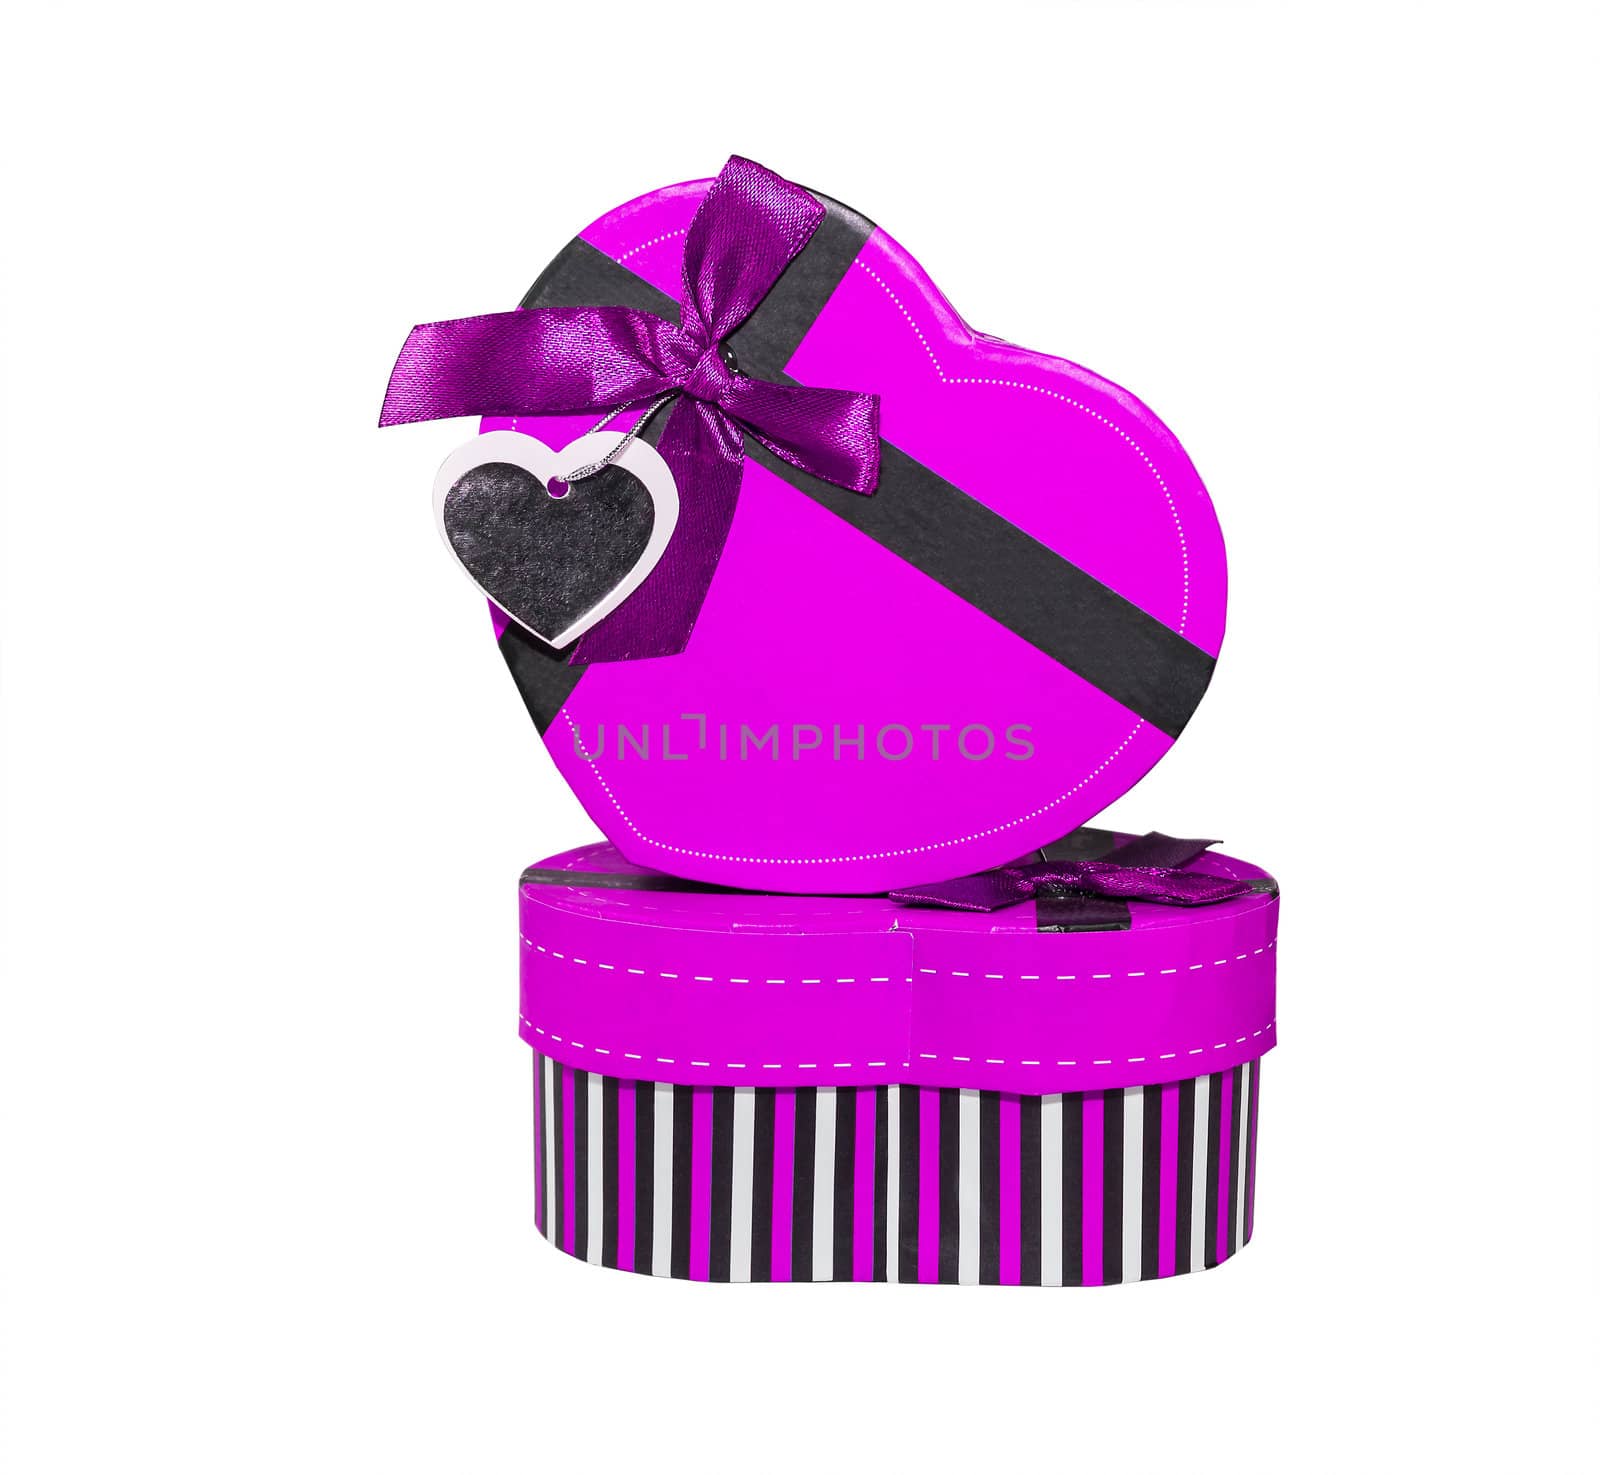 Violet Heart shaped box in heart shape on white background